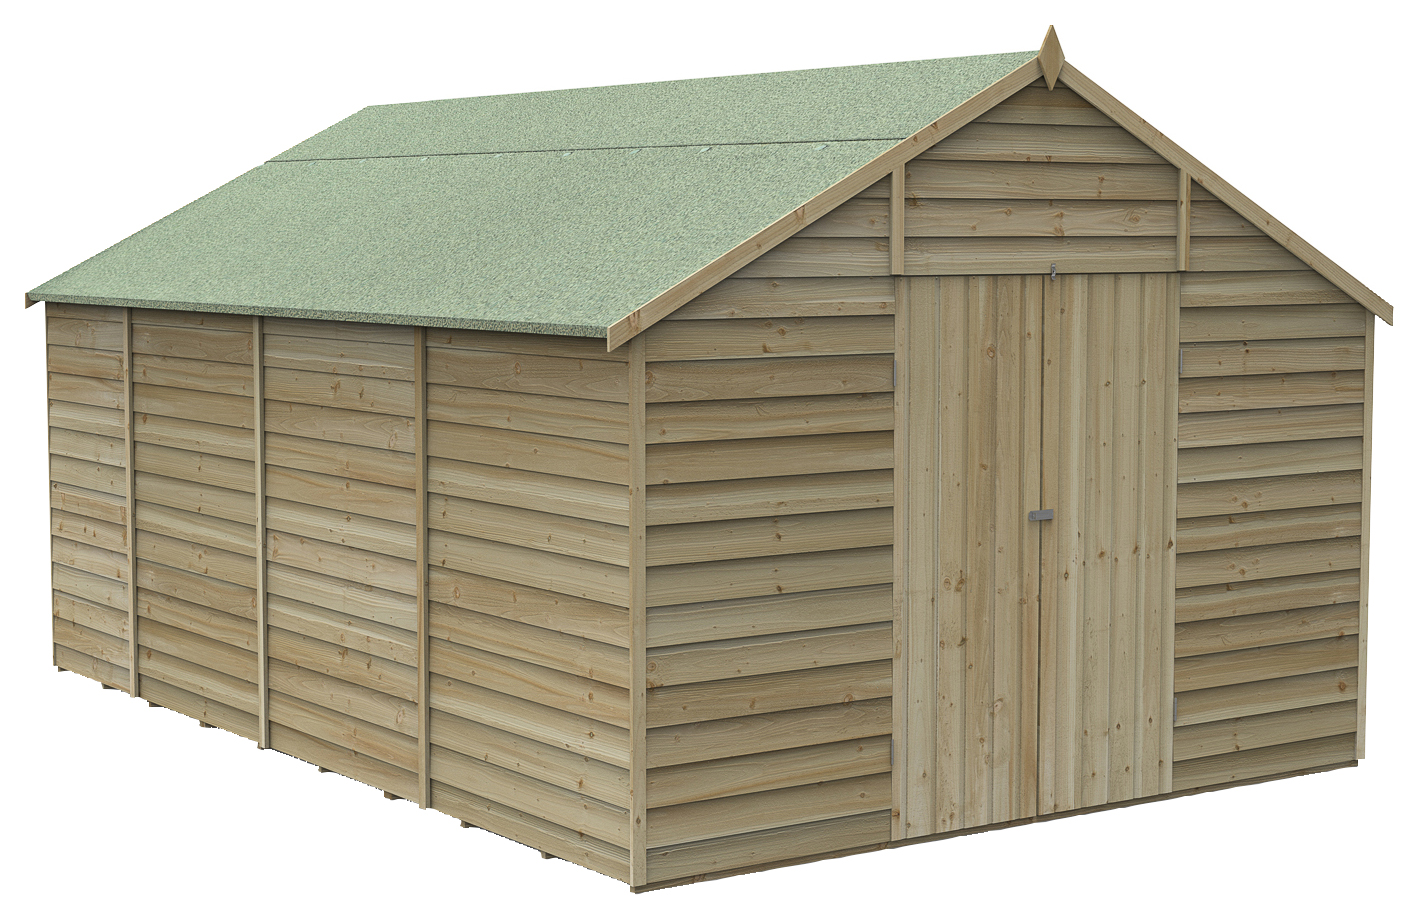 Forest Garden 10 x 15ft 4Life Apex Overlap Pressure Treated Double Door Windowless Shed with Base and Assembly